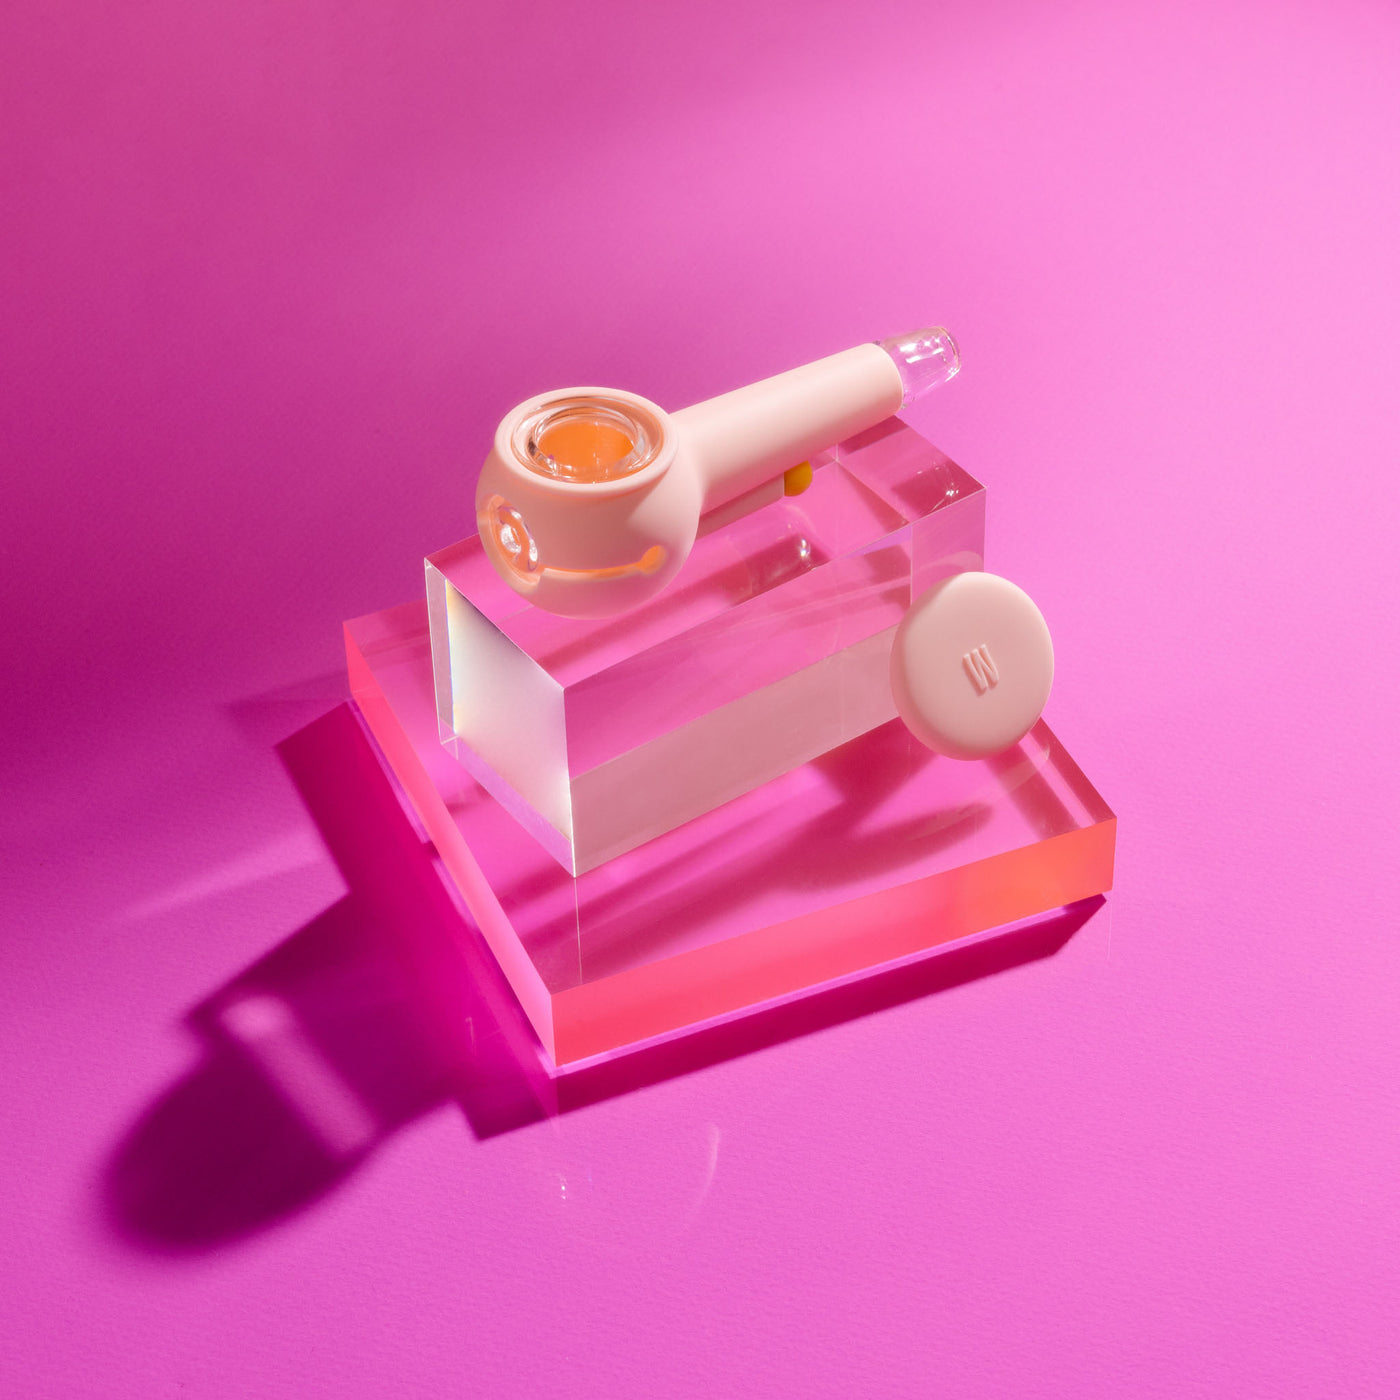 Product photo of a stylish baby pink designer pipe on a block of glowing acrylic glass, cap uncovered.